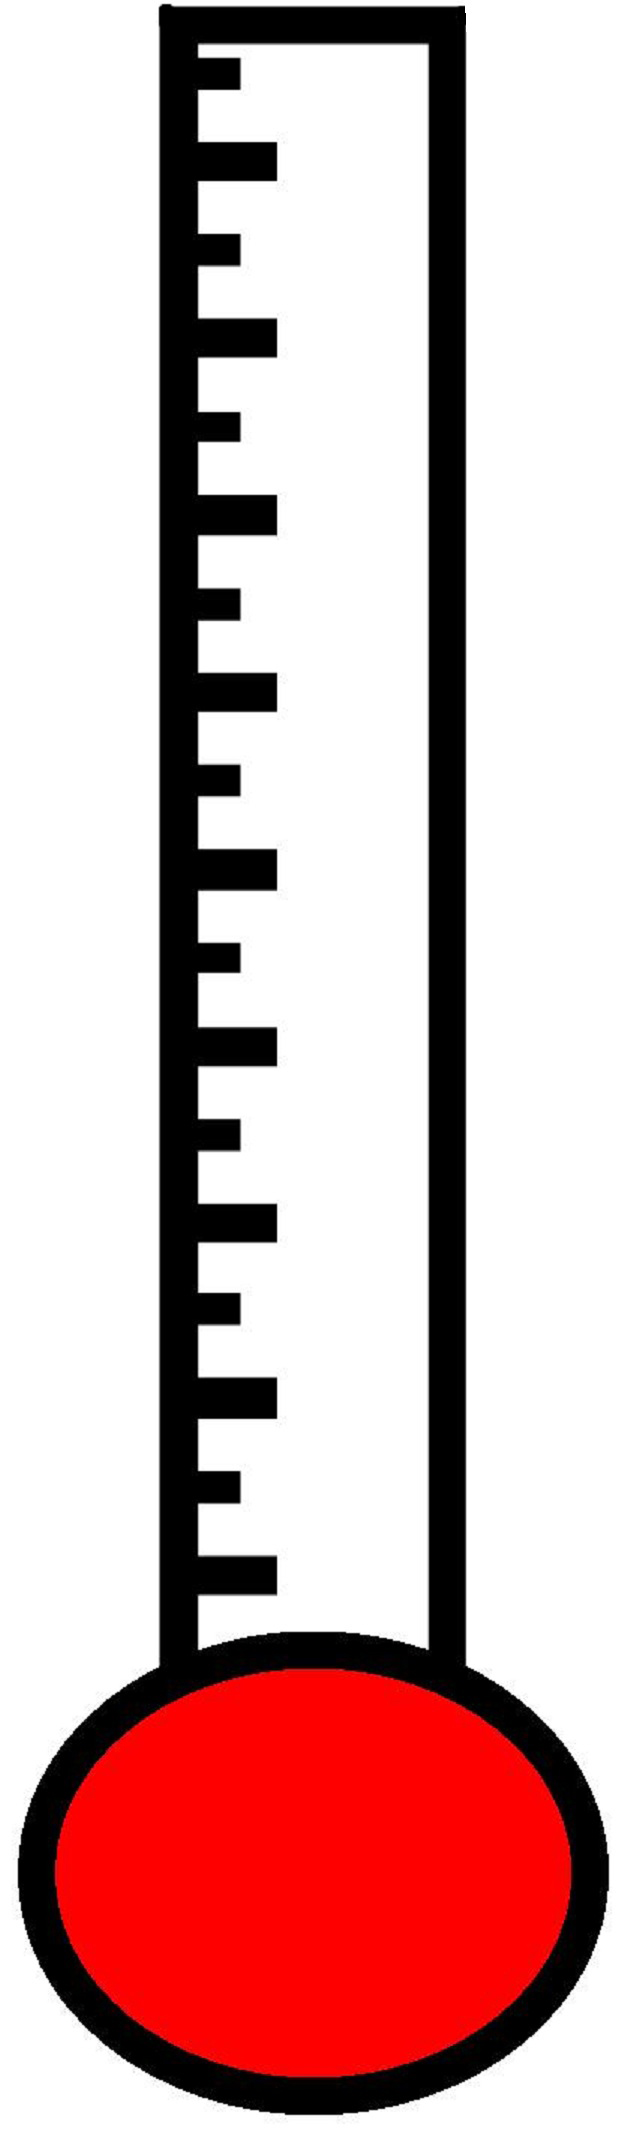 Thermometer Chart Template At Chandooorg I Have Goal   Clipart Best    